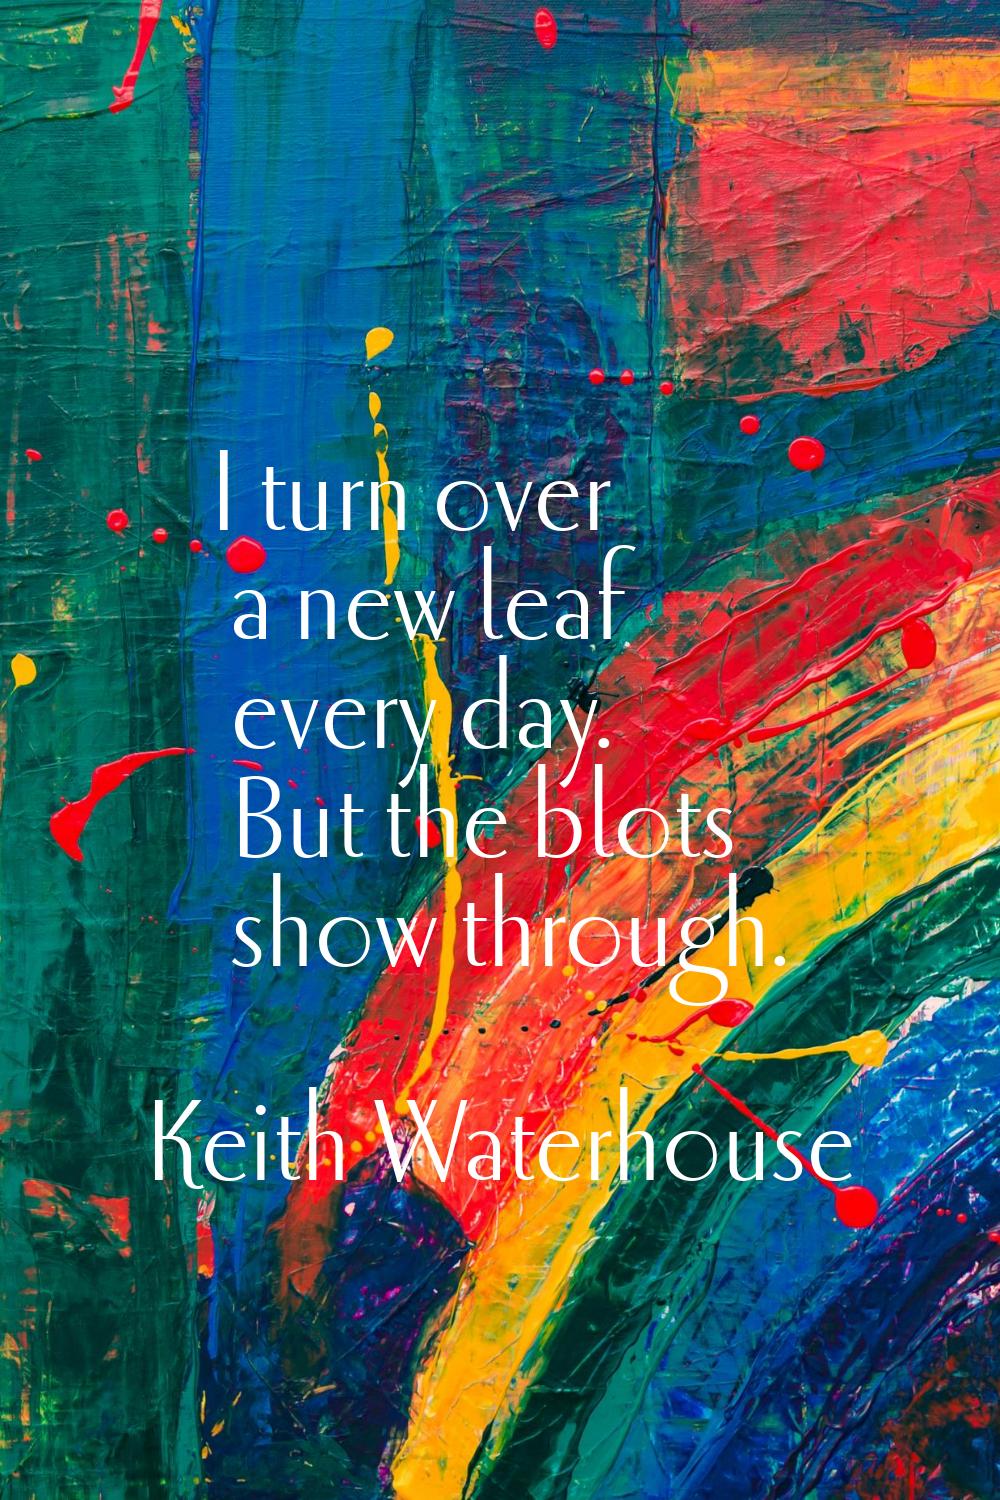 I turn over a new leaf every day. But the blots show through.